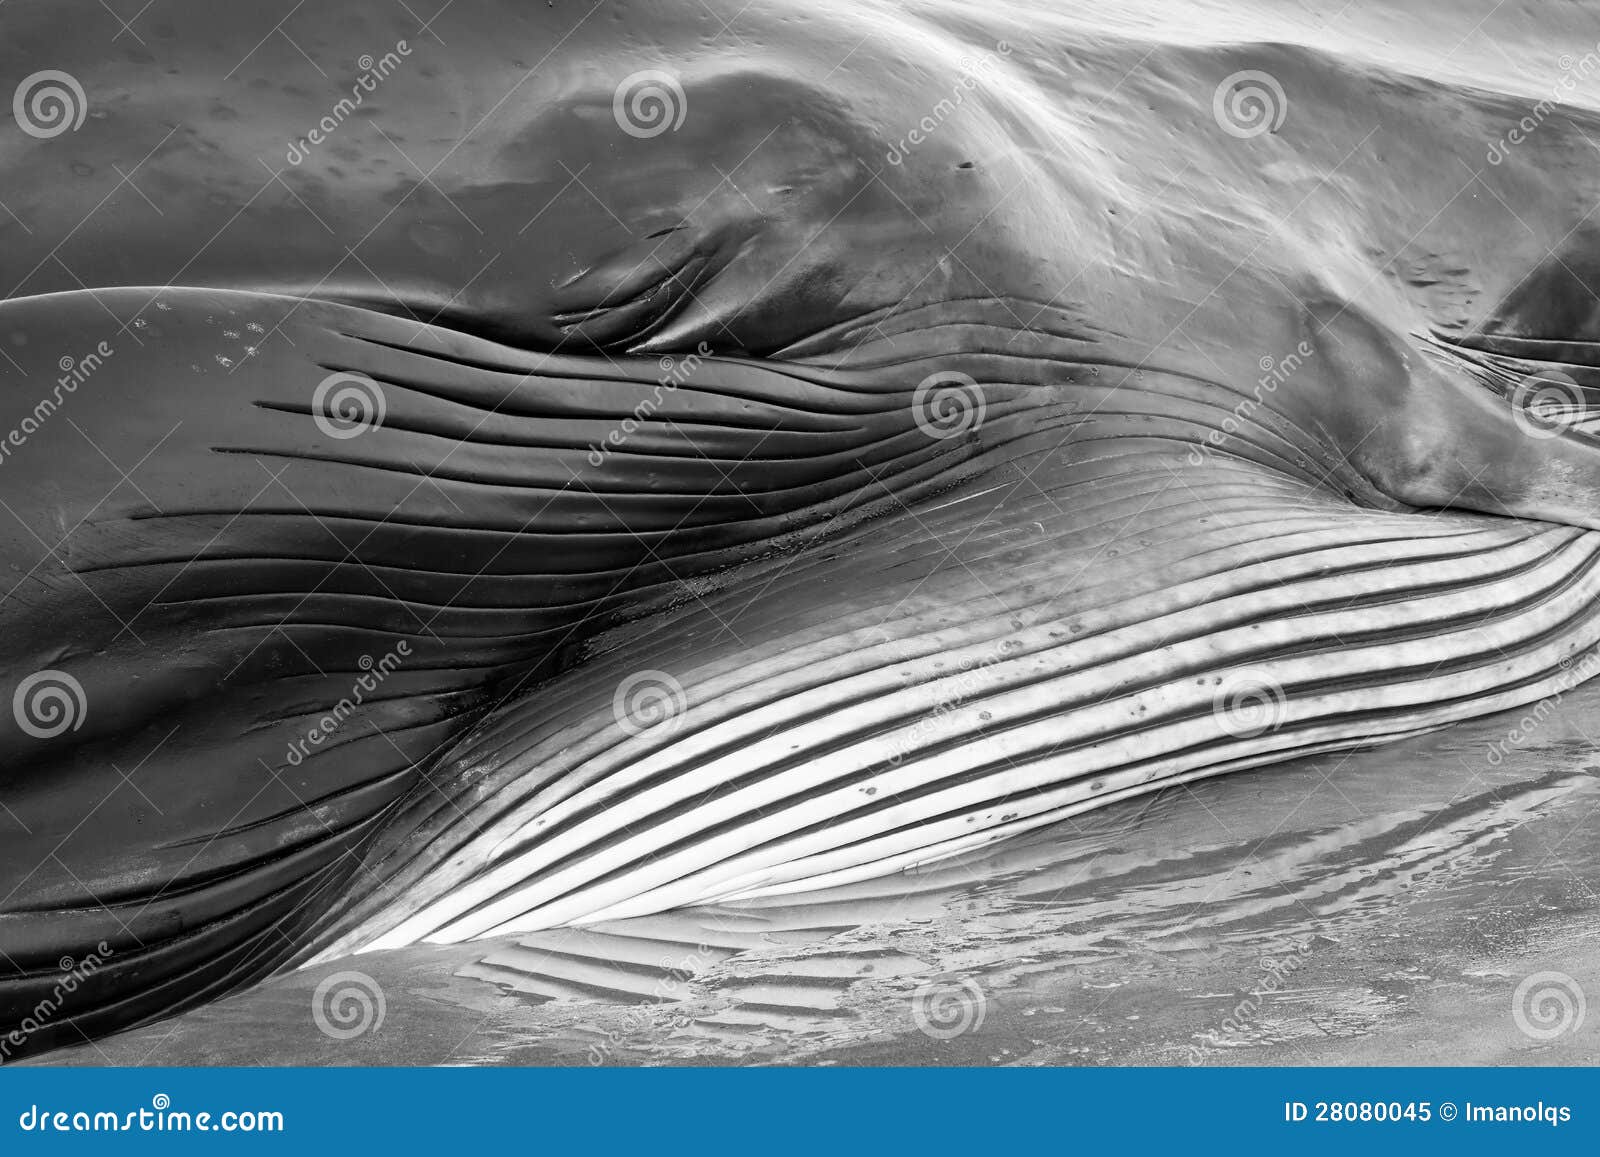 beached fin whale